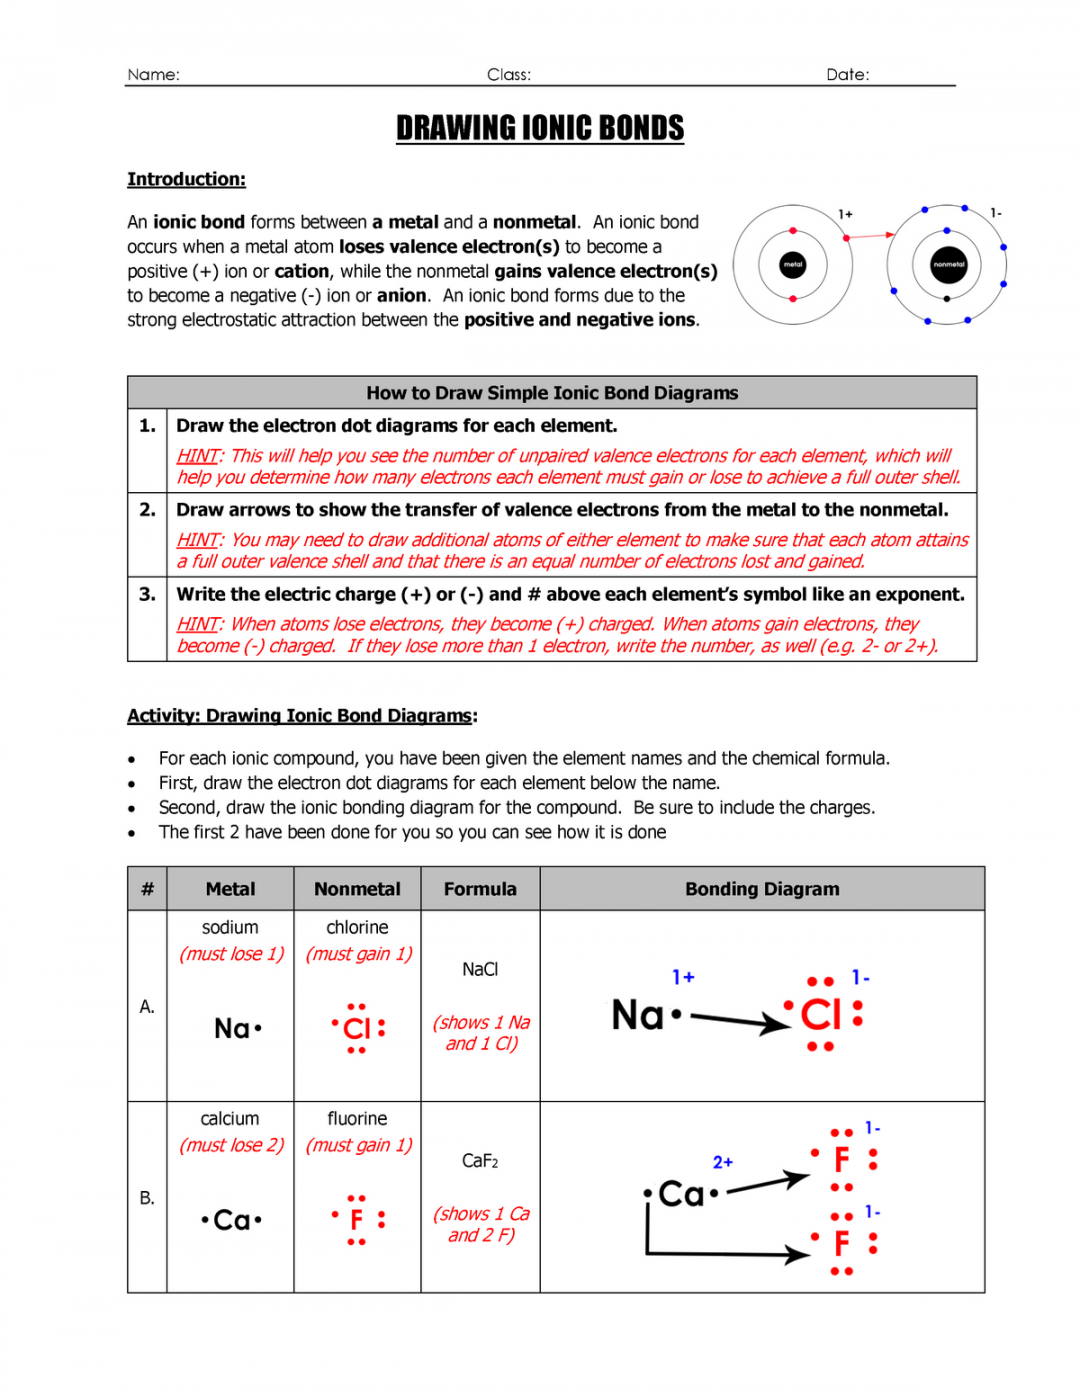 Practice Drawing Ionic Bonds Worksheet Answers